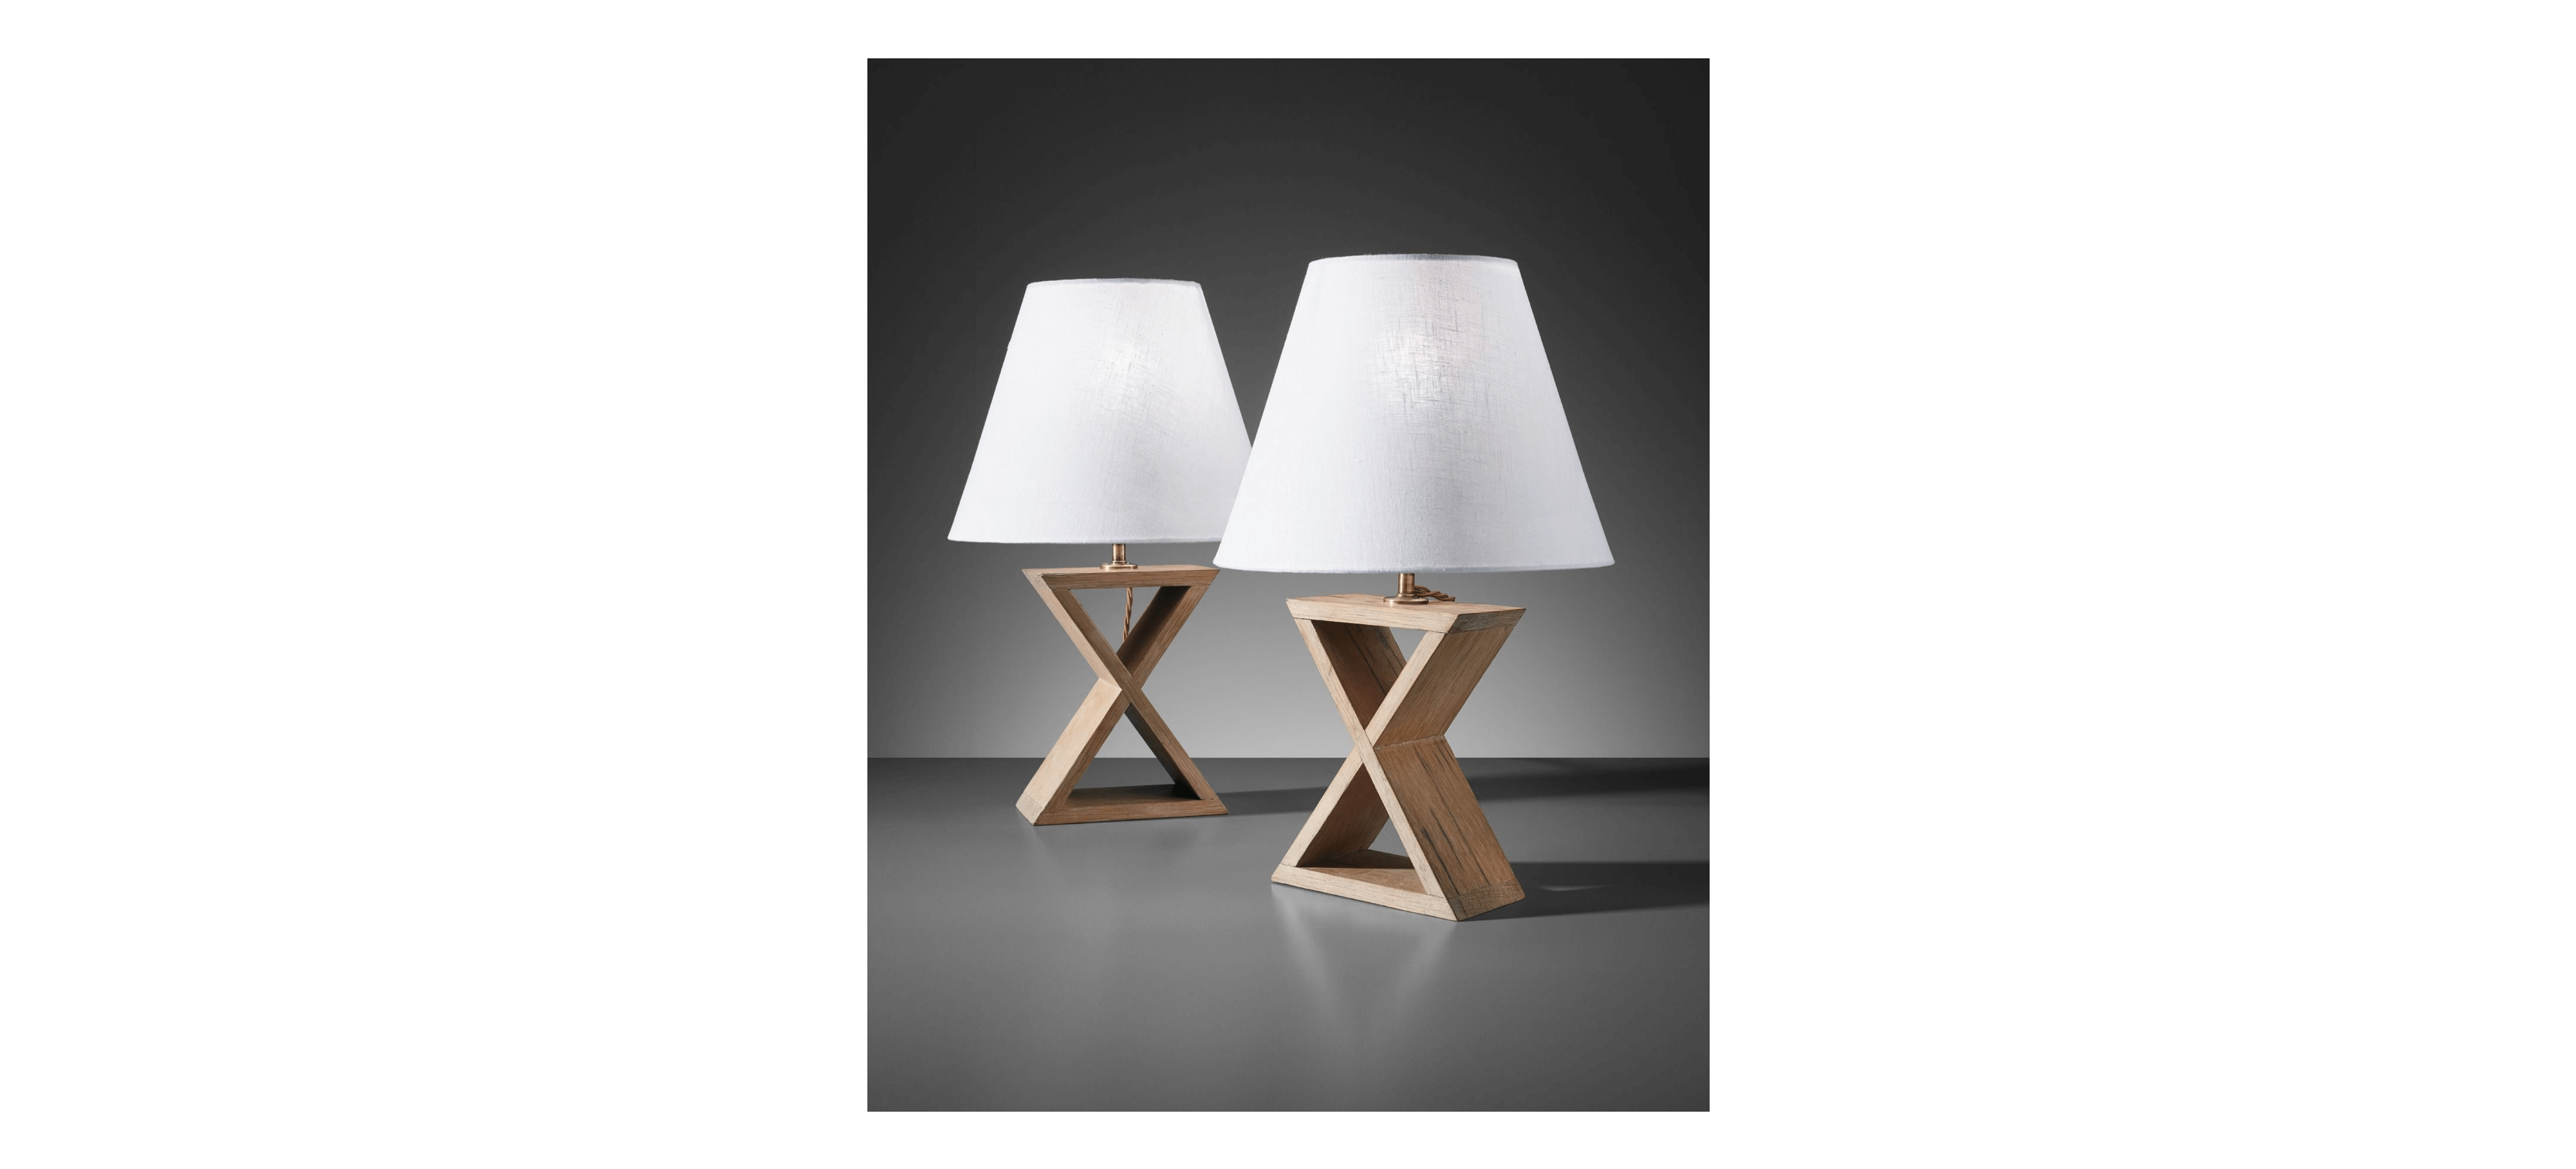 X wooden table lamp - Radwell Designs